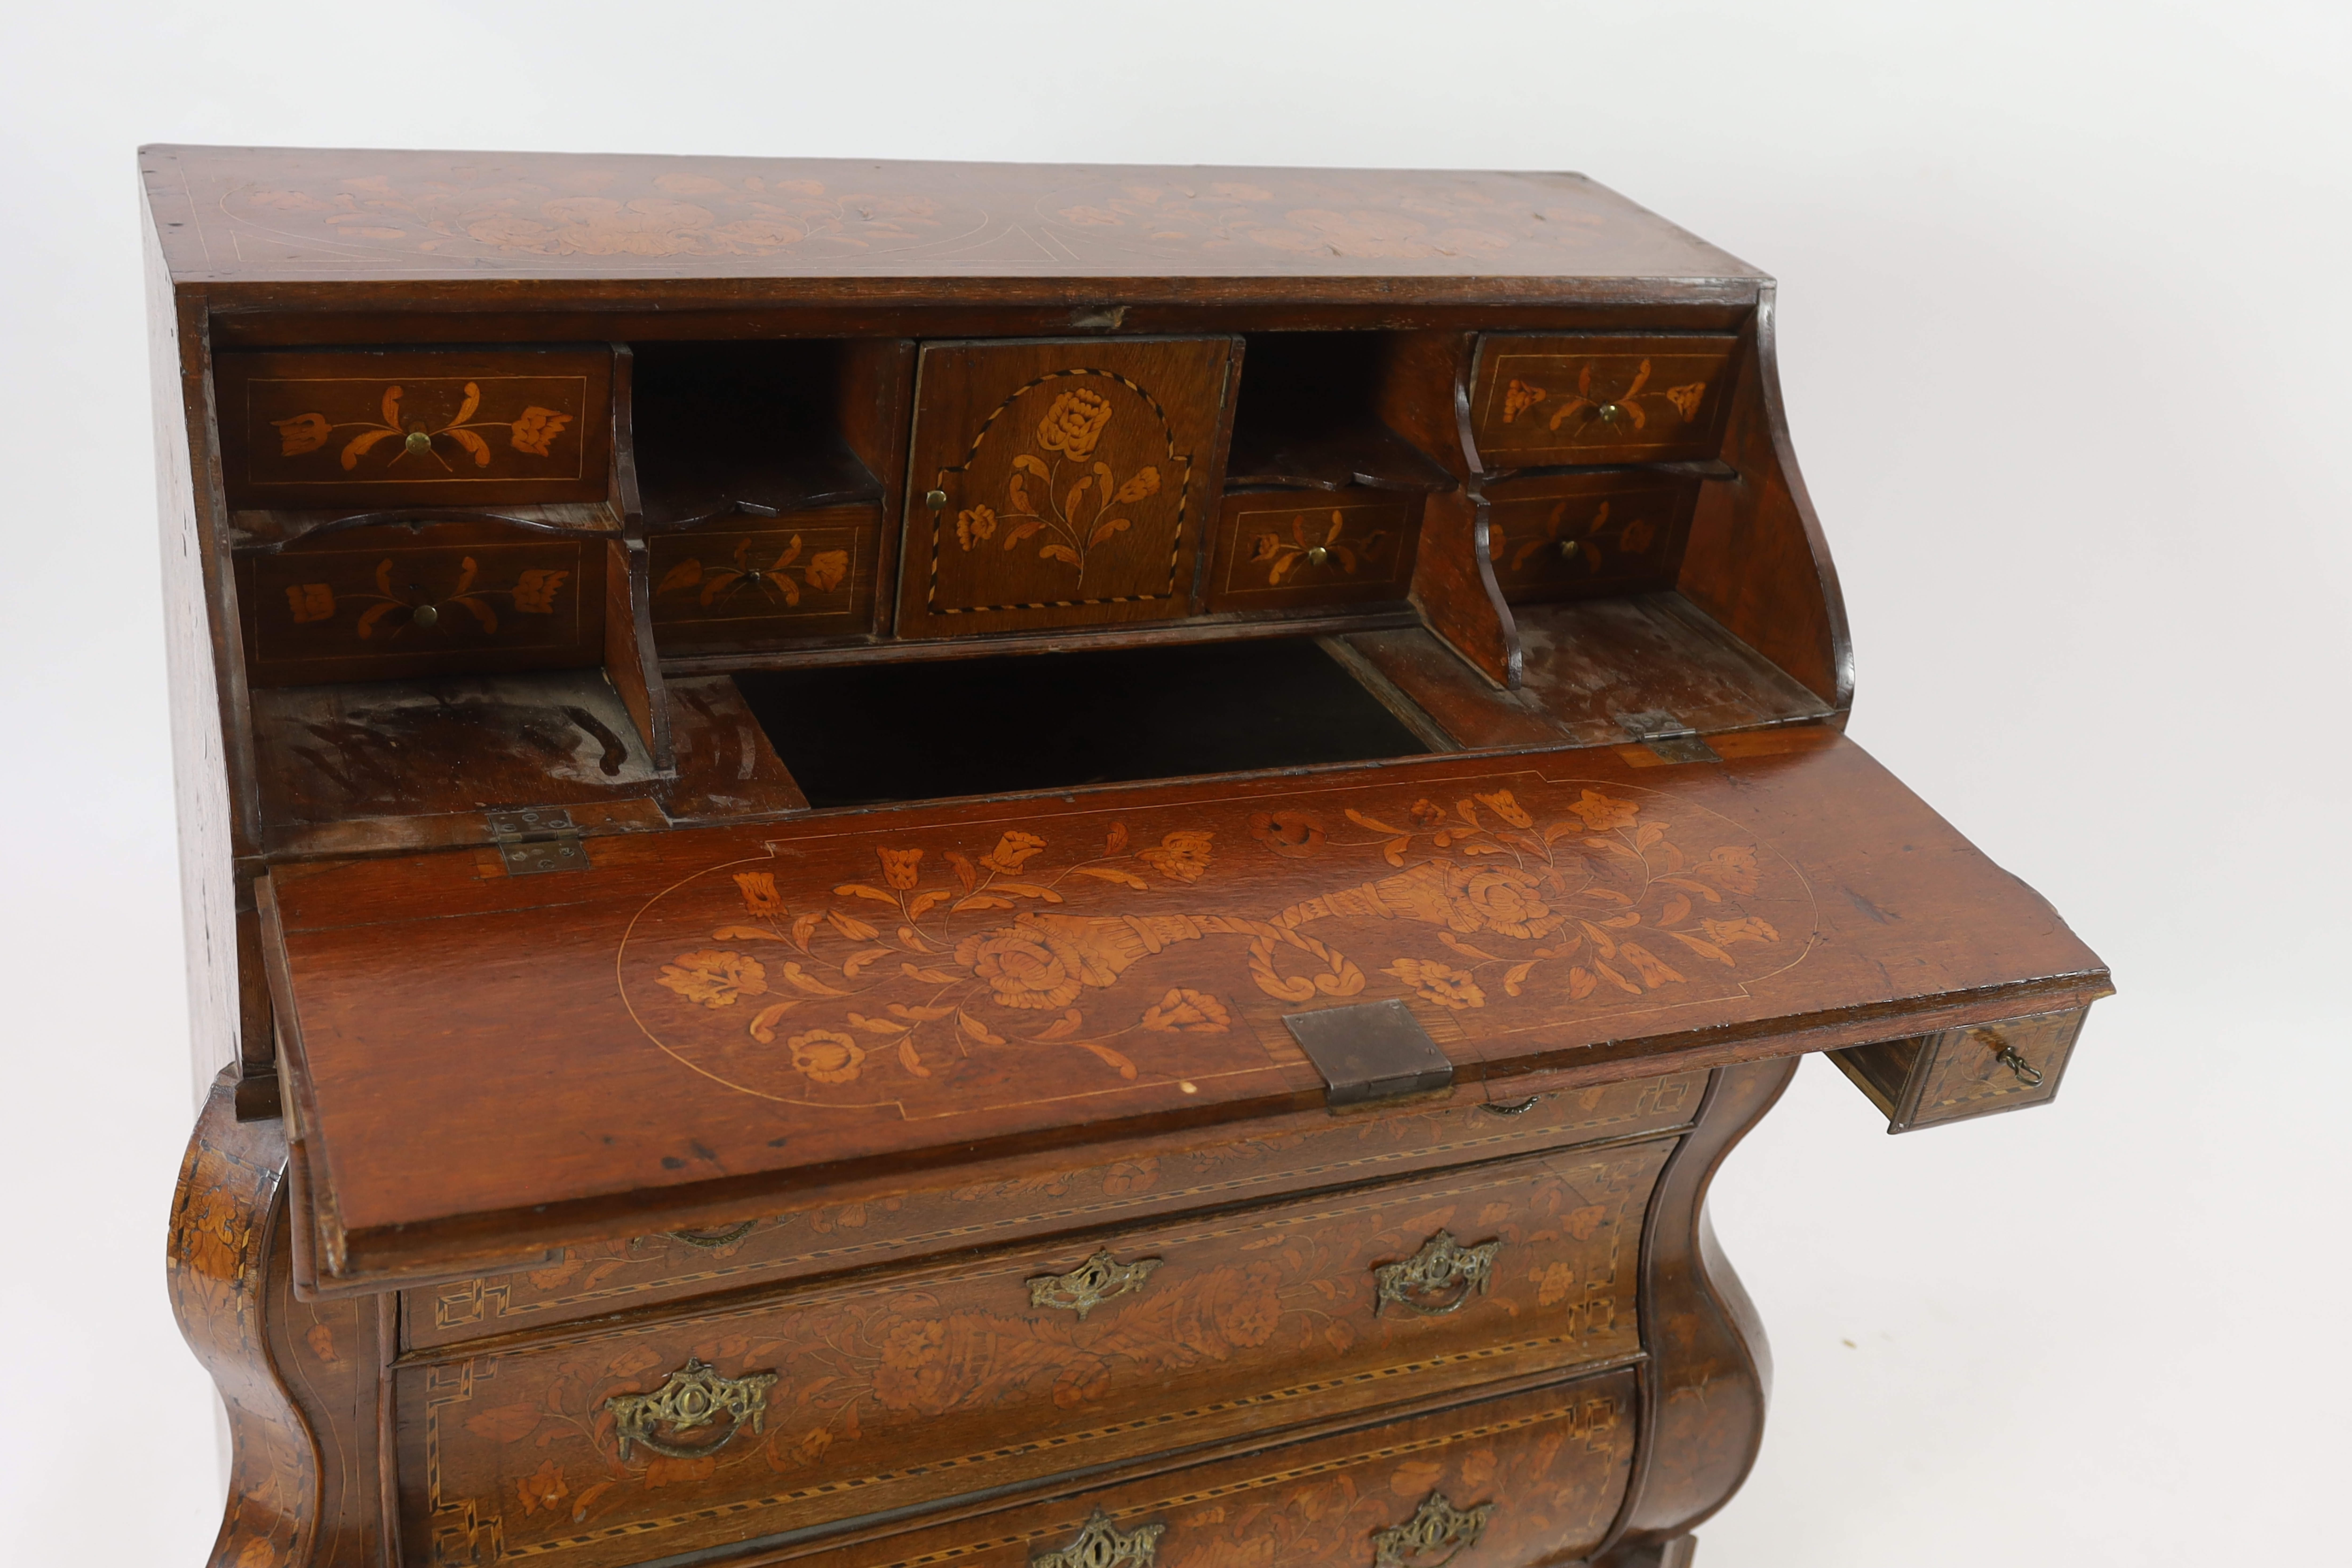 A late 18th century Dutch oak and floral marquetry double bombe bureau